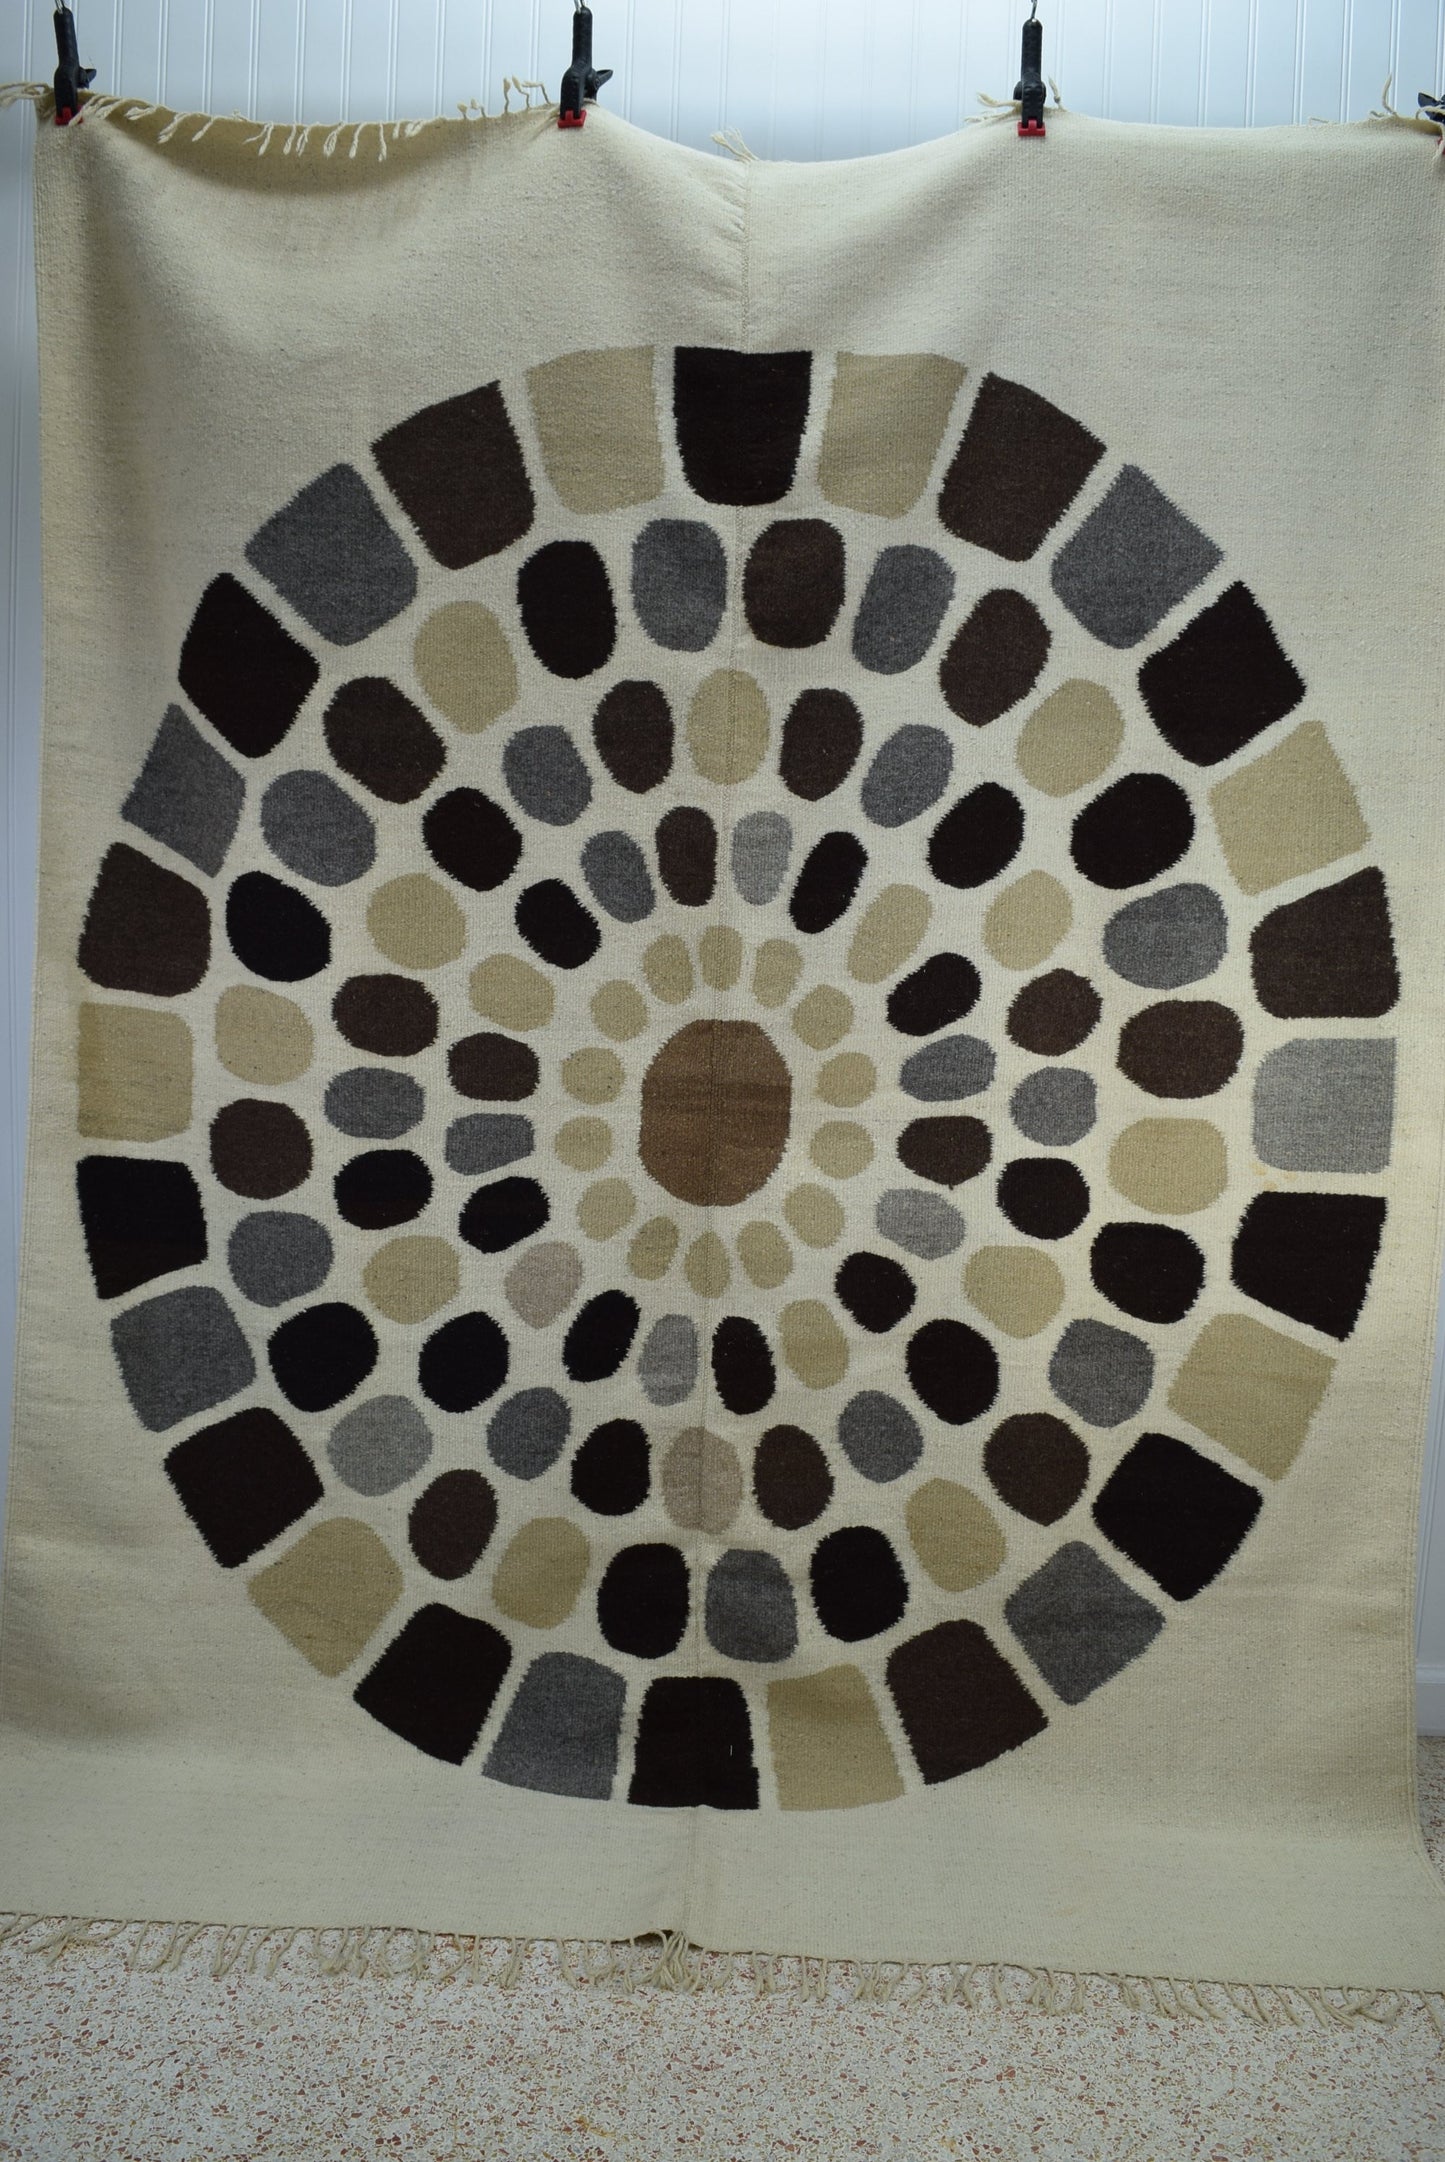 Wool Area Rug Natural Browns Greys Center Medallion Geometric Fringed